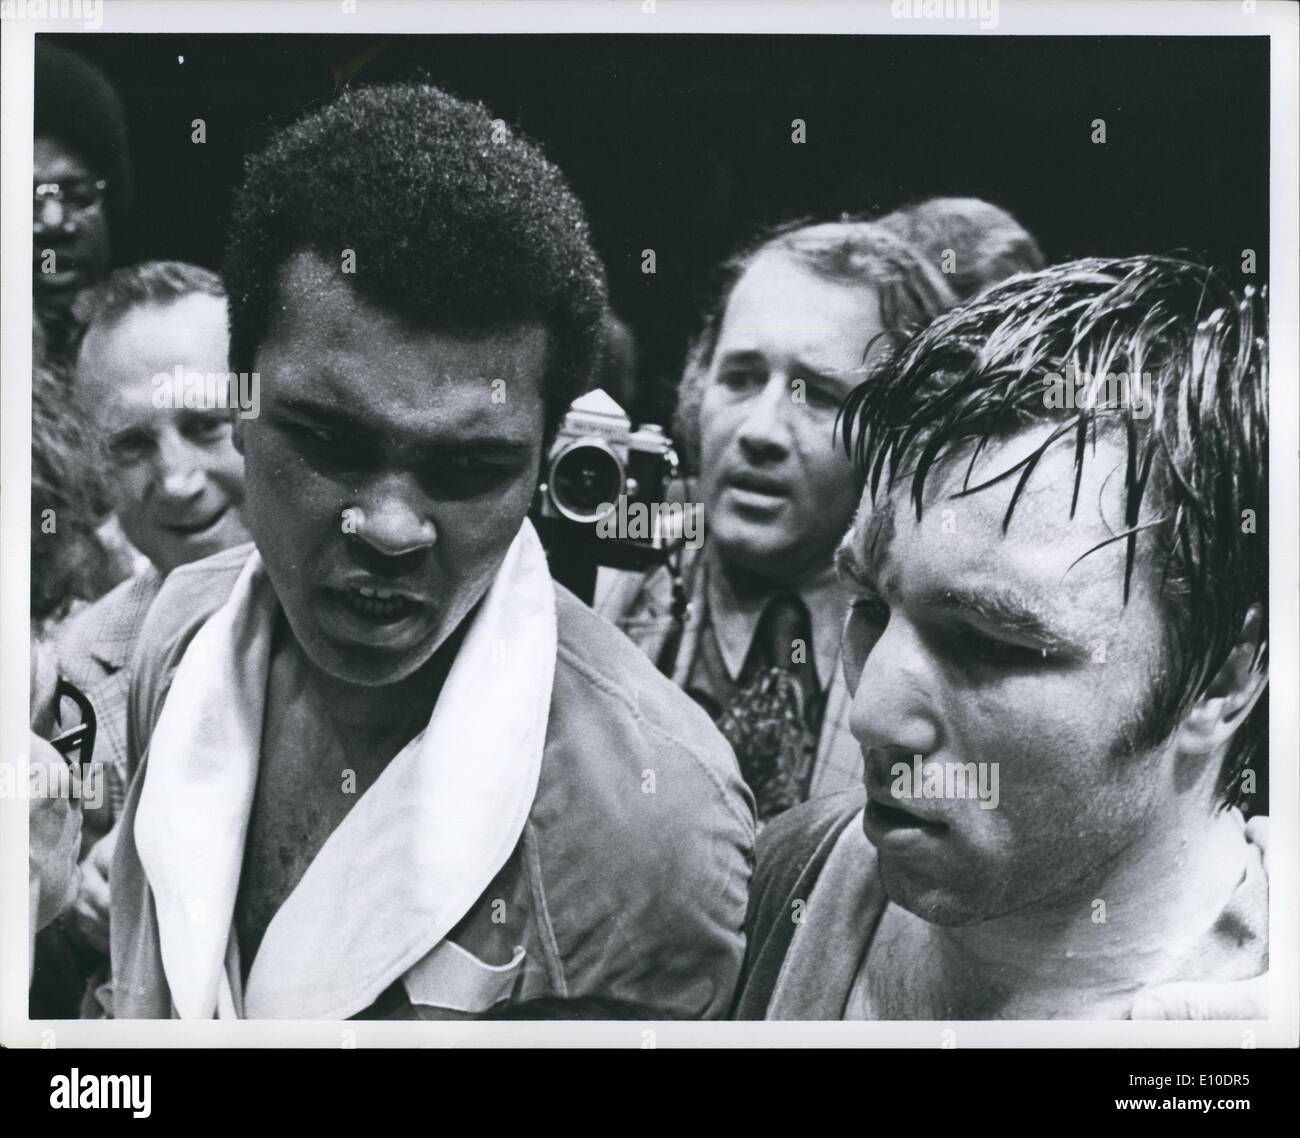 May 05, 1972 - Muhammed Ali-George Chuvalo Fight Vancouver-May 1, 1972 Stock Photo